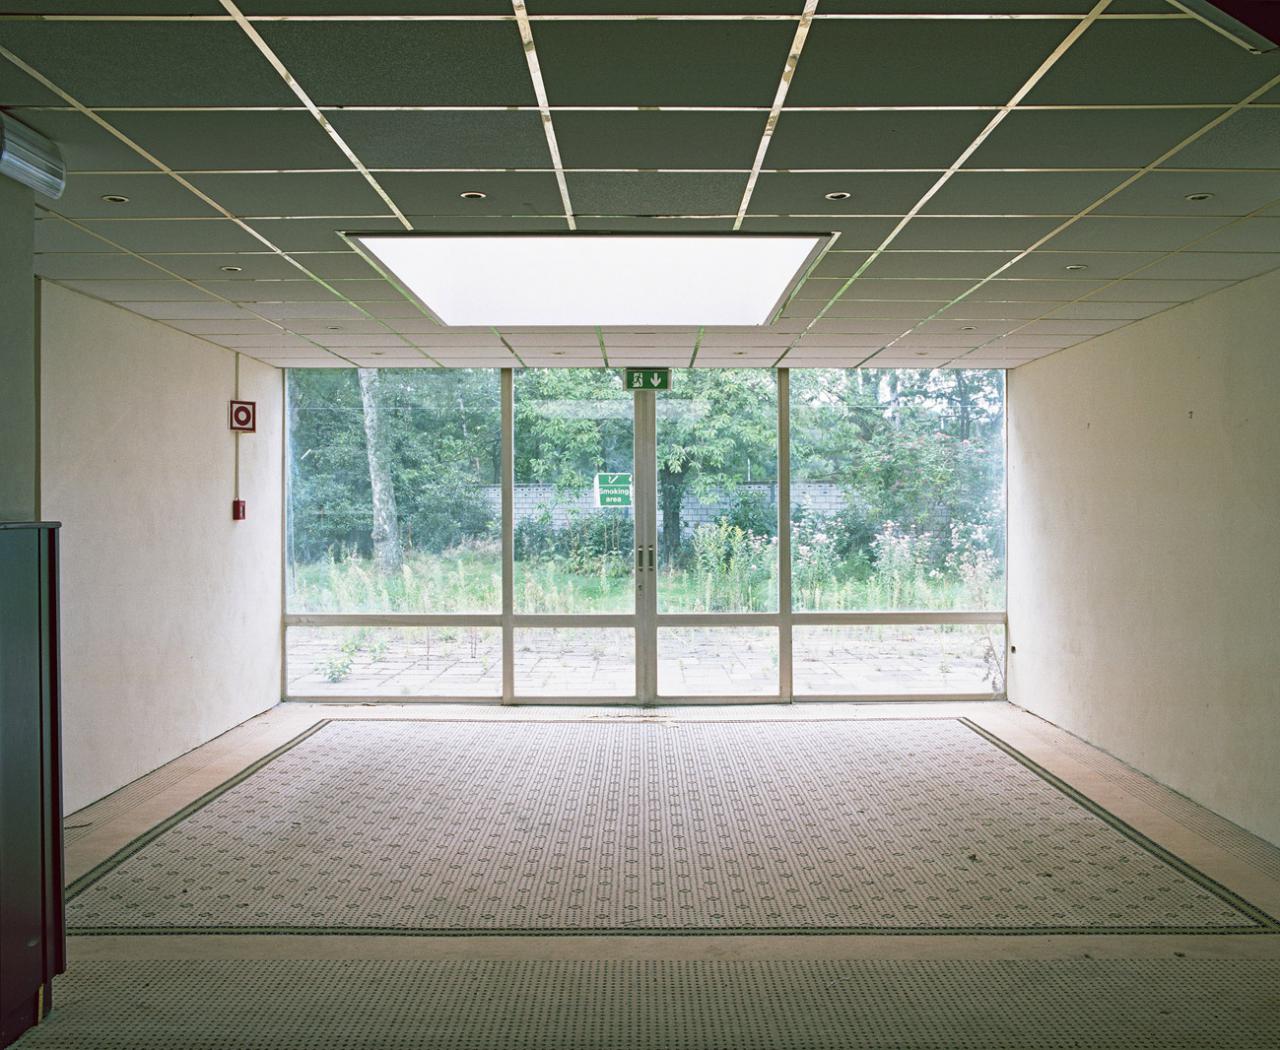 An empty room with large windows overlooking in a leafy outdoor area.